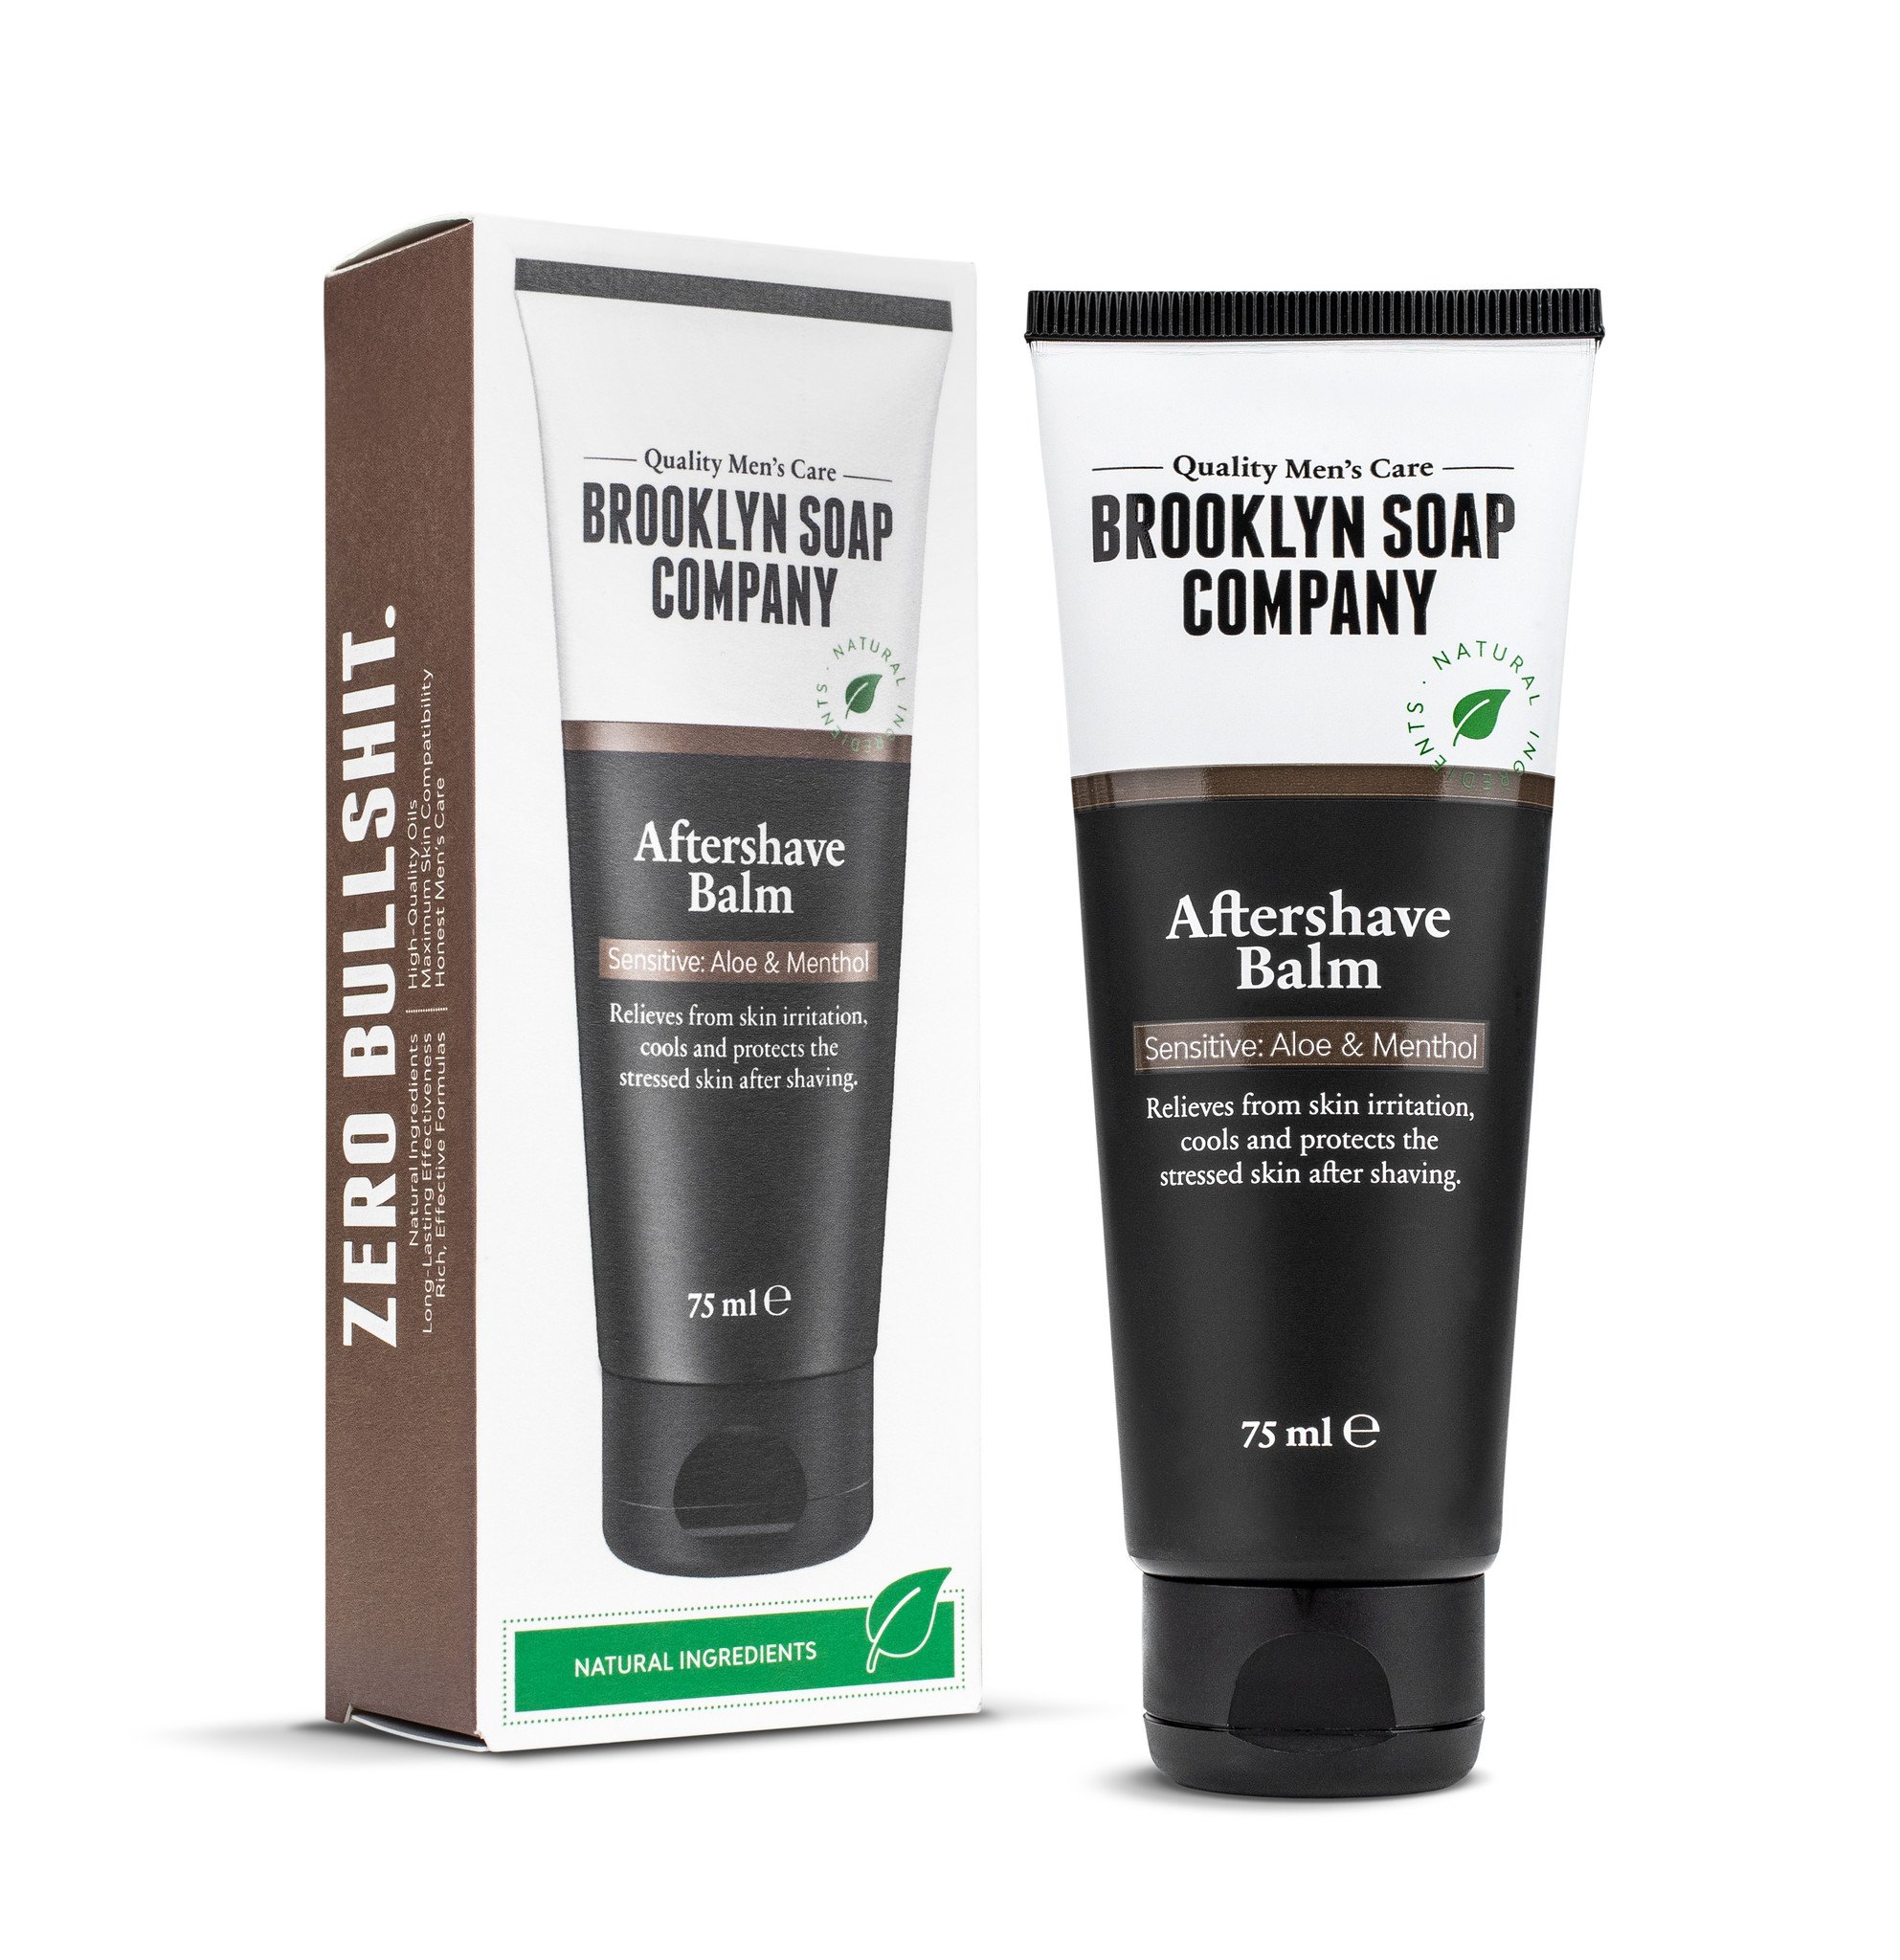 Aftershave Balm (2019) - Natural Beauty Products from La Maison Noire